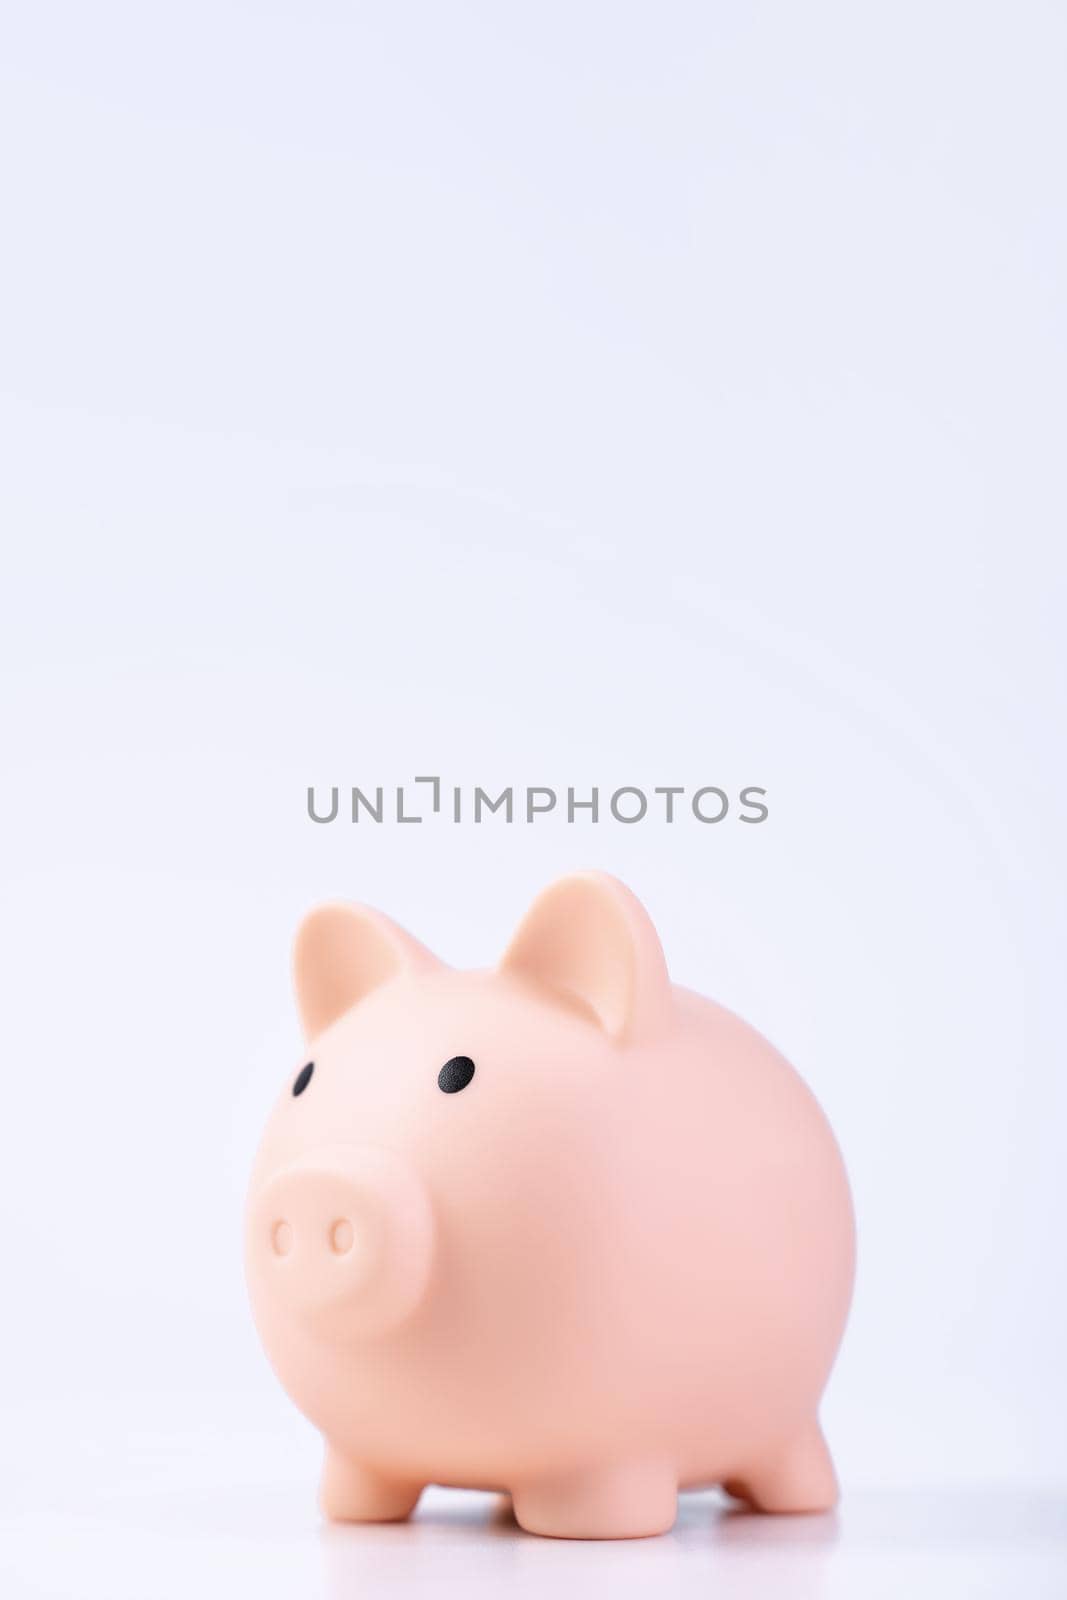 Financial concpet - Deposit box, Piggy bank, beautiful model on white background, saving money to pay for loan or insurance, close up, copy space.